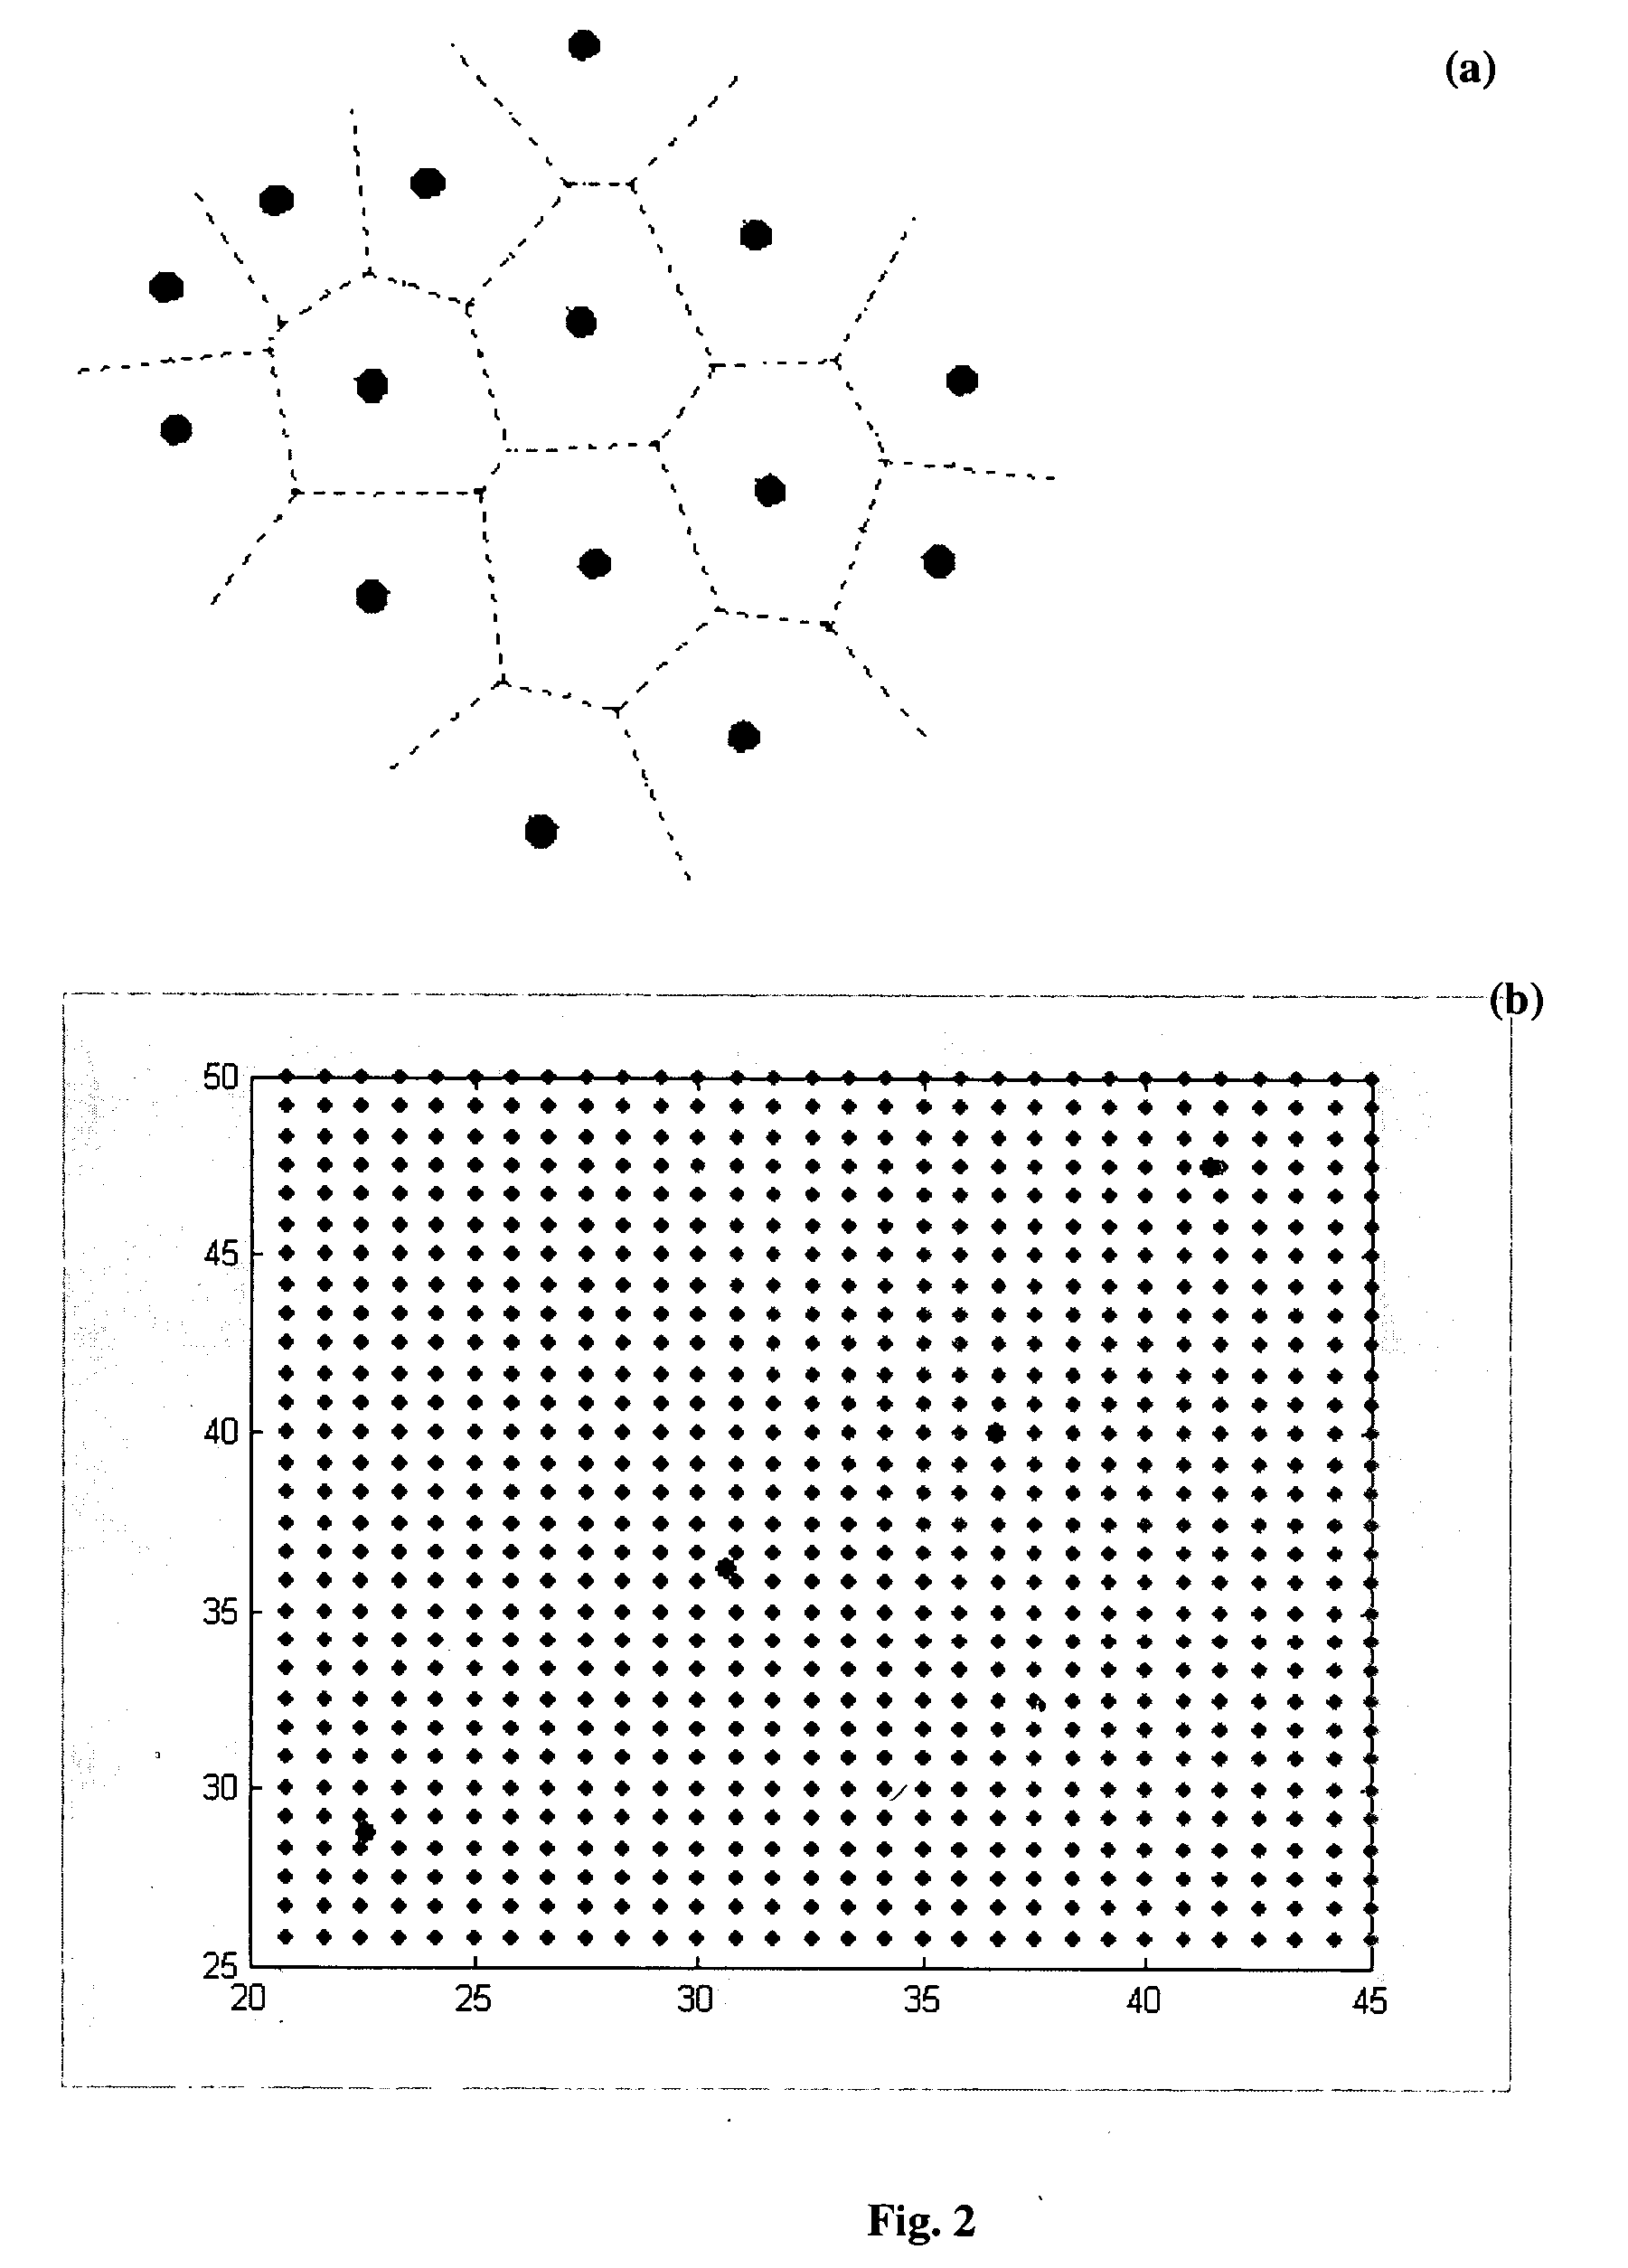 Generation of three dimensional fractal subsurface structure by Voronoi Tessellation and computation of gravity response of such fractal structure